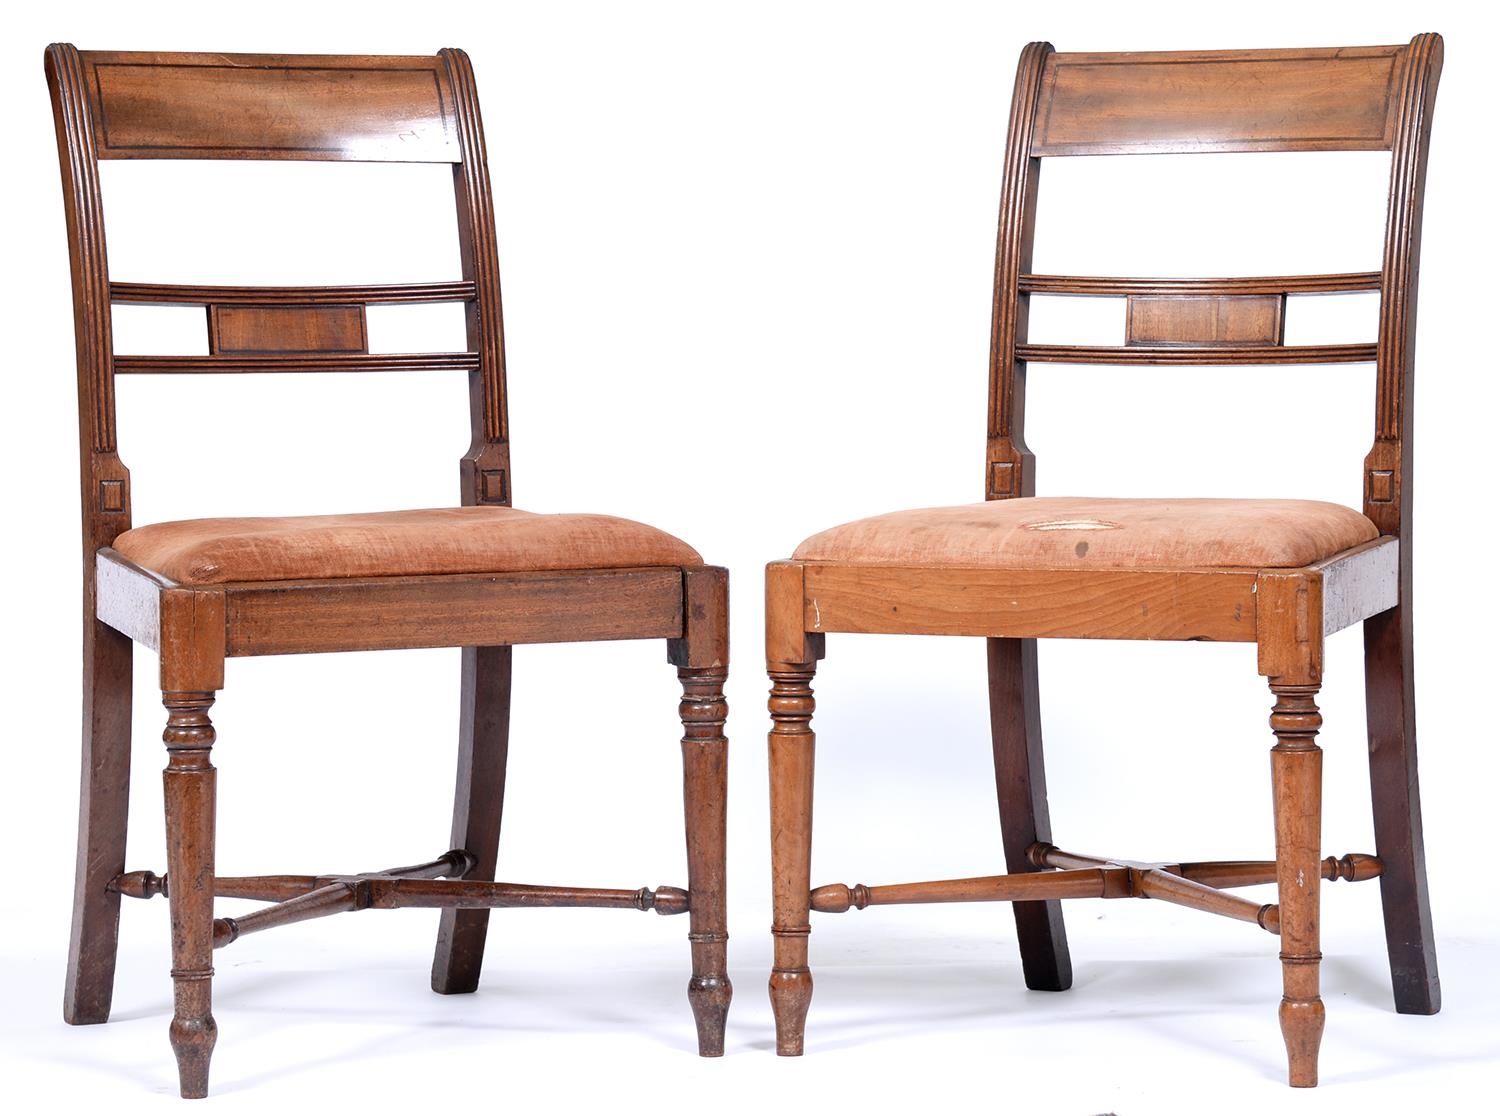 A pair of George III mahogany dining chairs, with tablet centred back rail and slip seat, on